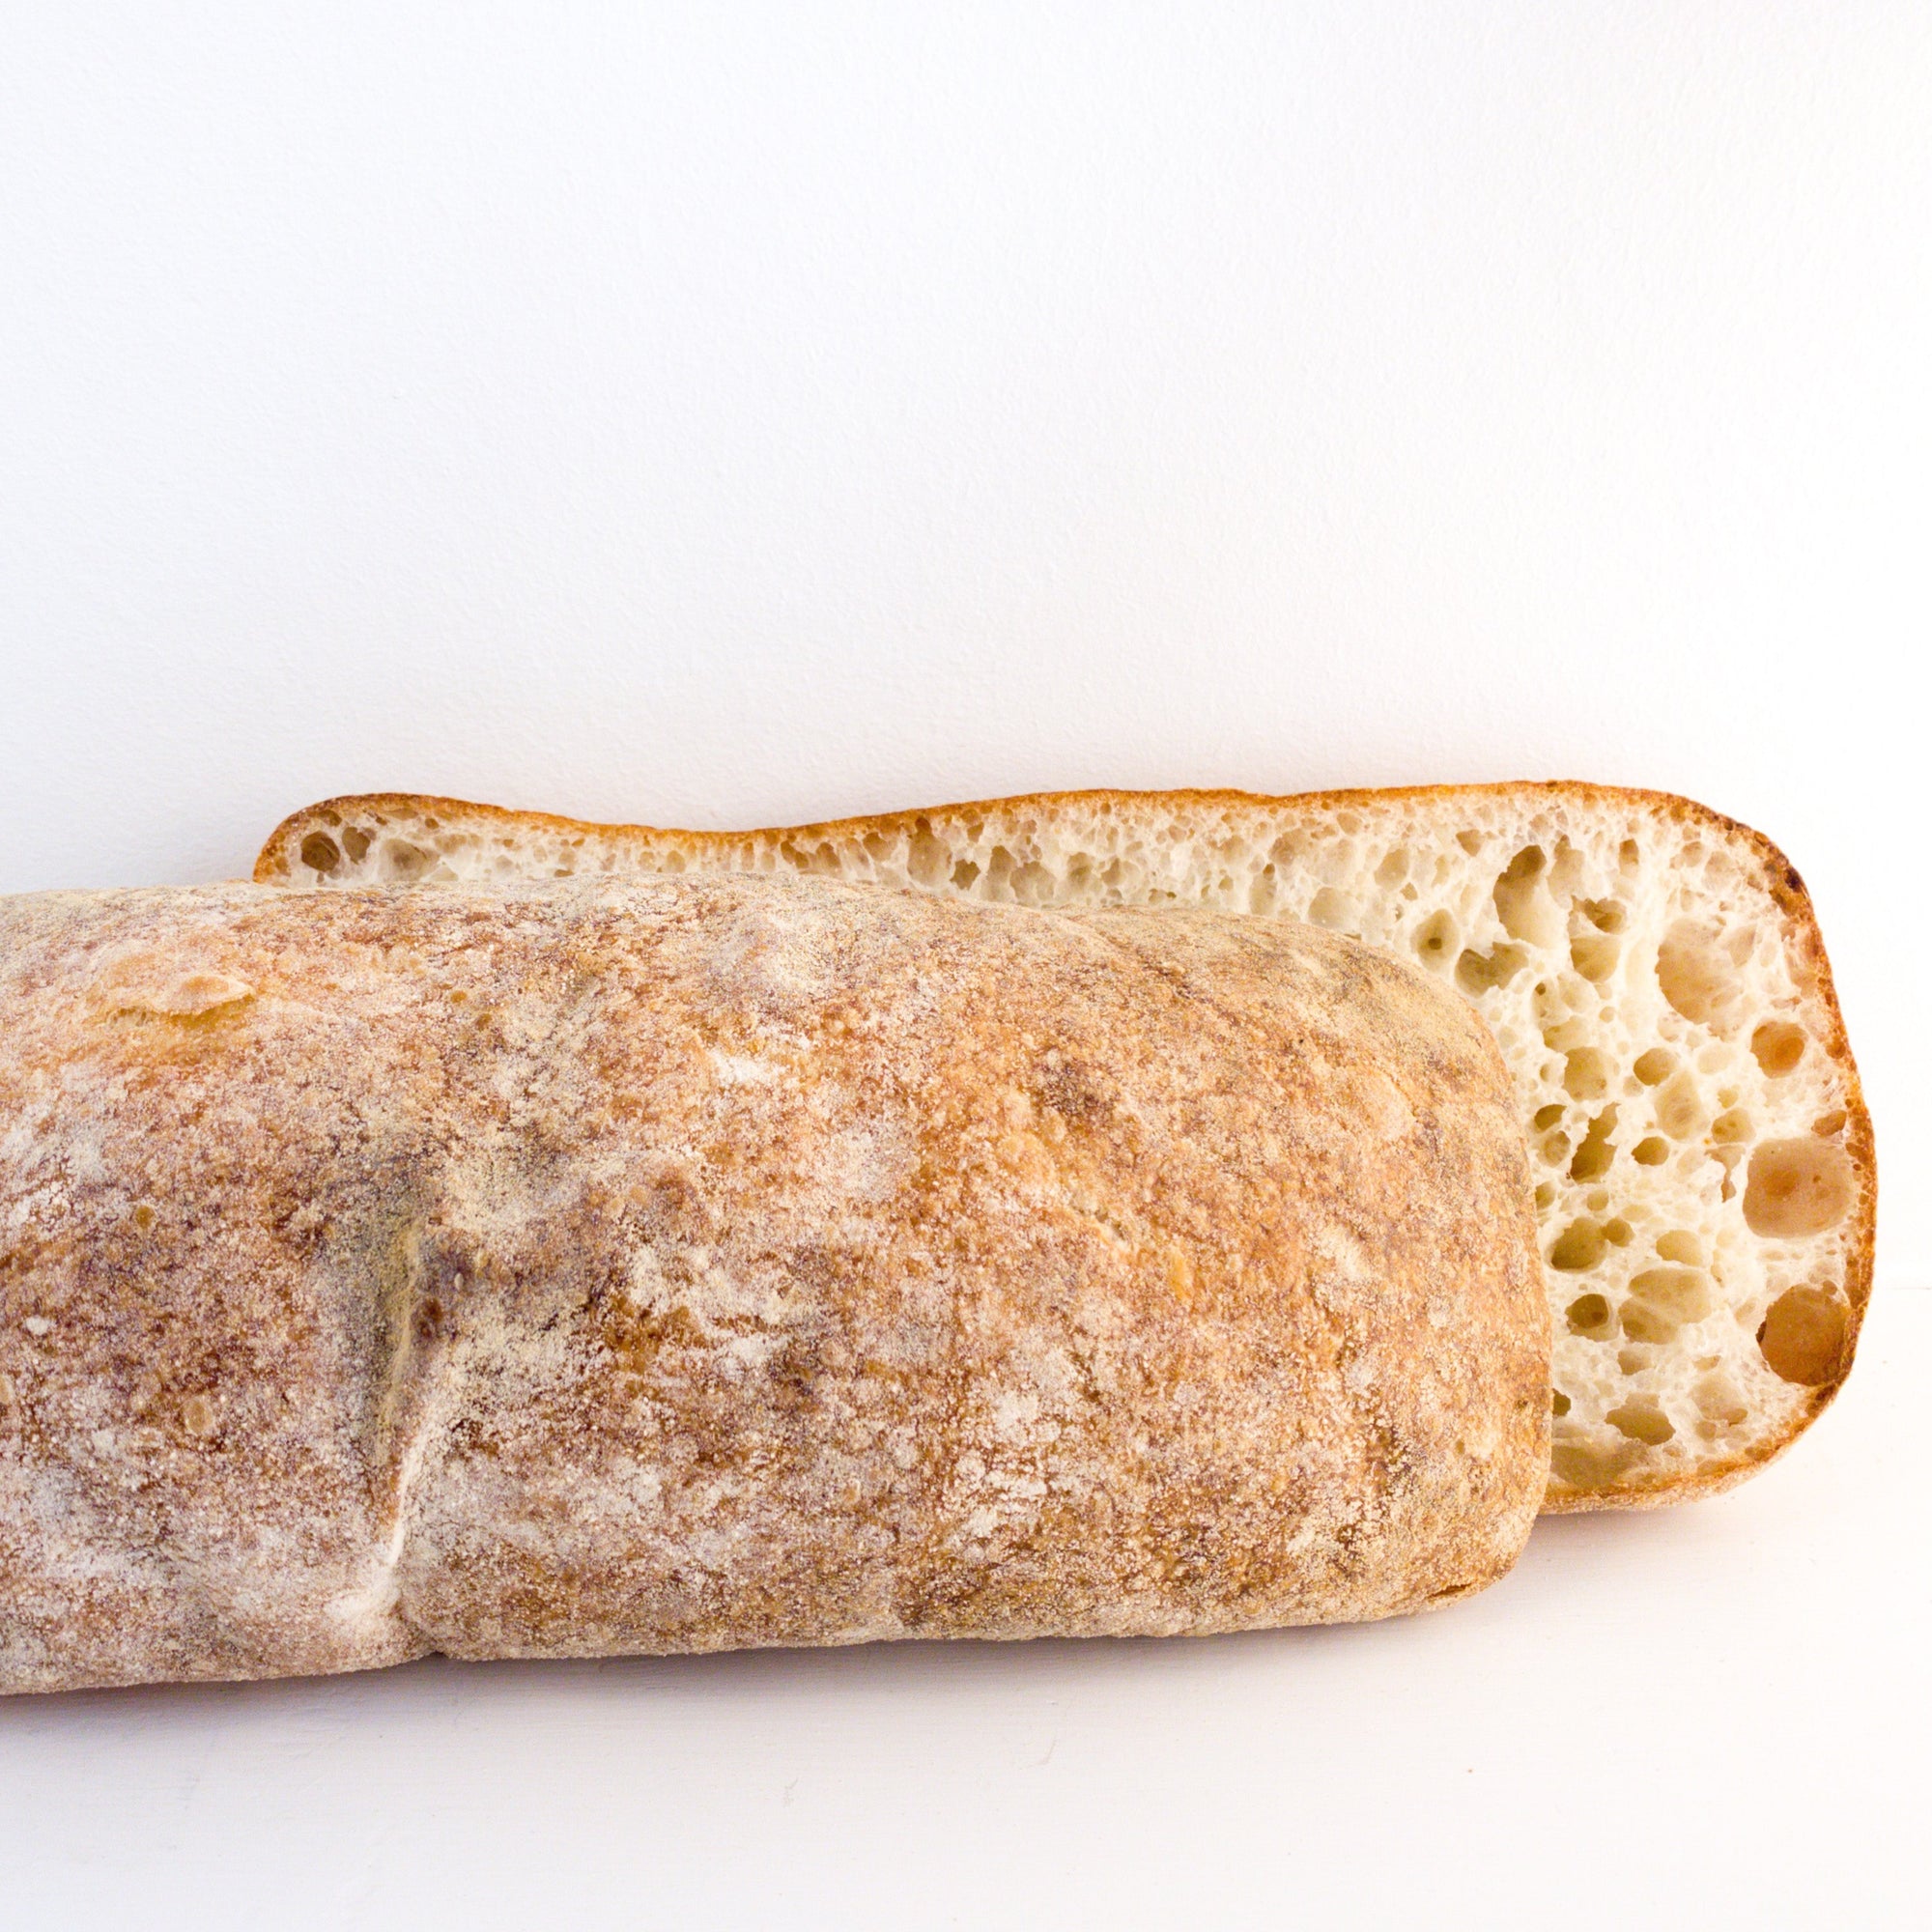 a larger image of the ciabatta that has been sliced in half